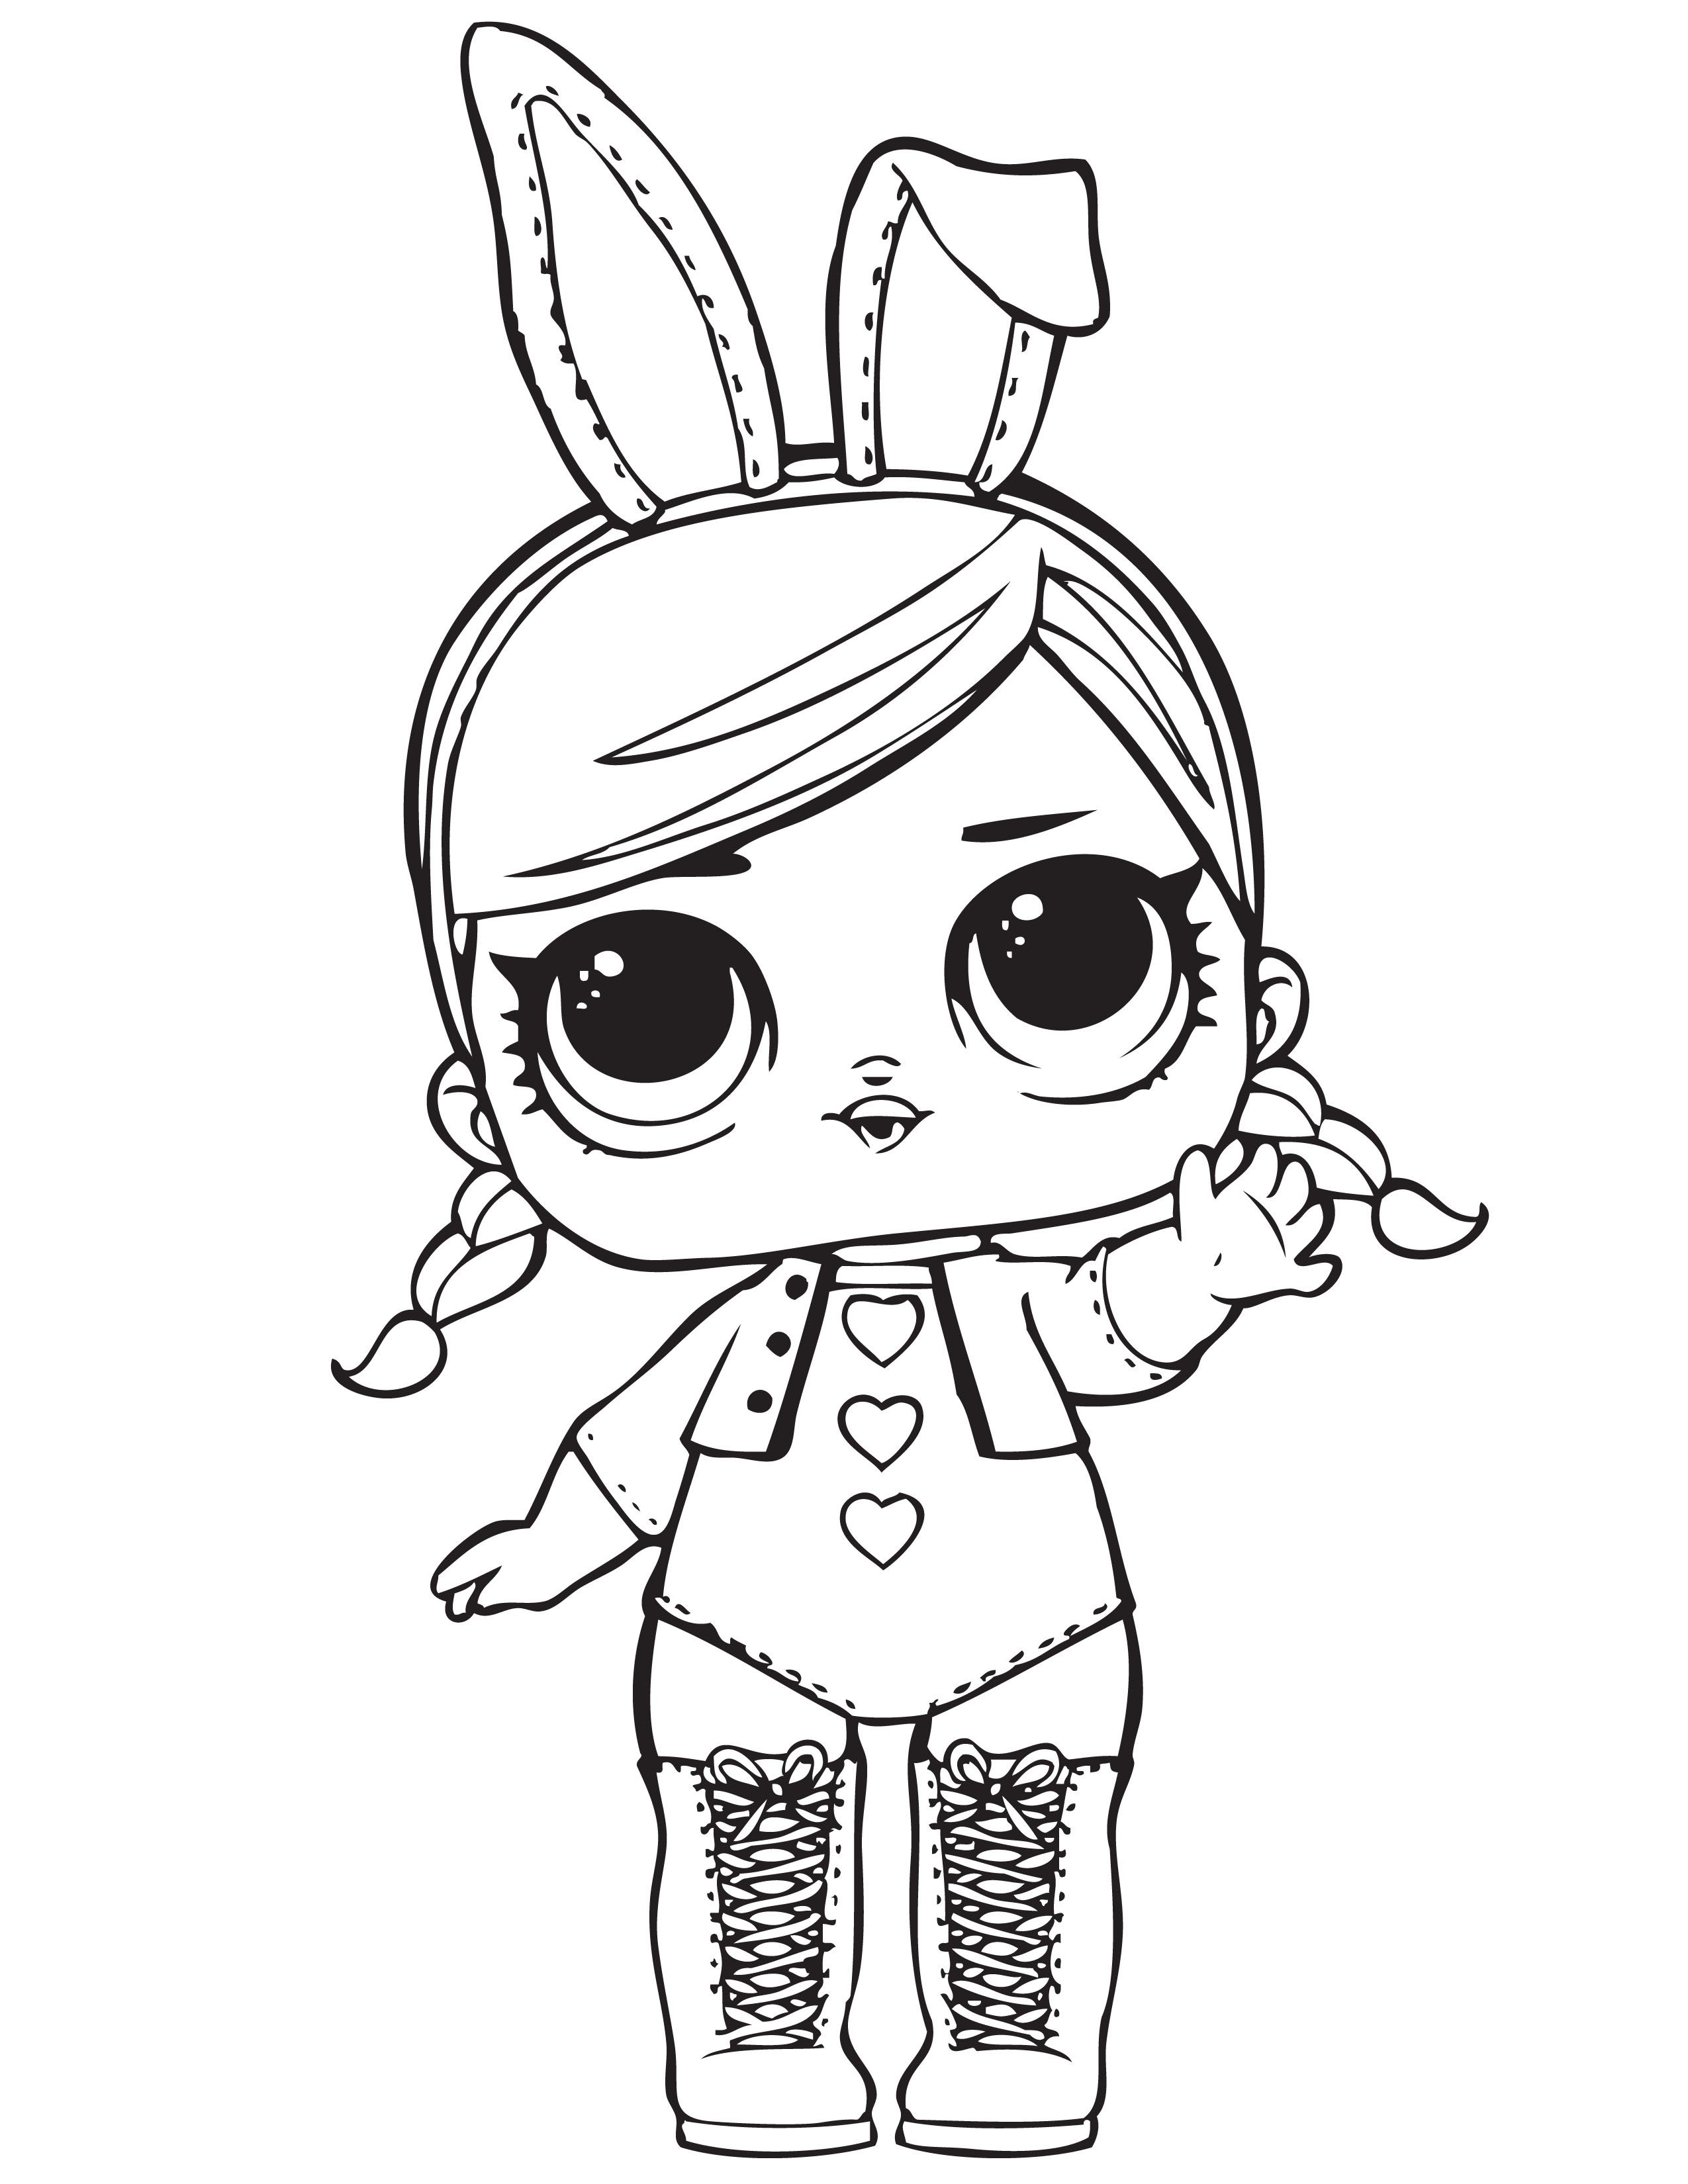 christmas-lol-doll-coloring-pages-a30e08d5f78eb39d8f2d2f38038aac89-hdyISC Christmas Lol Doll Coloring Pages